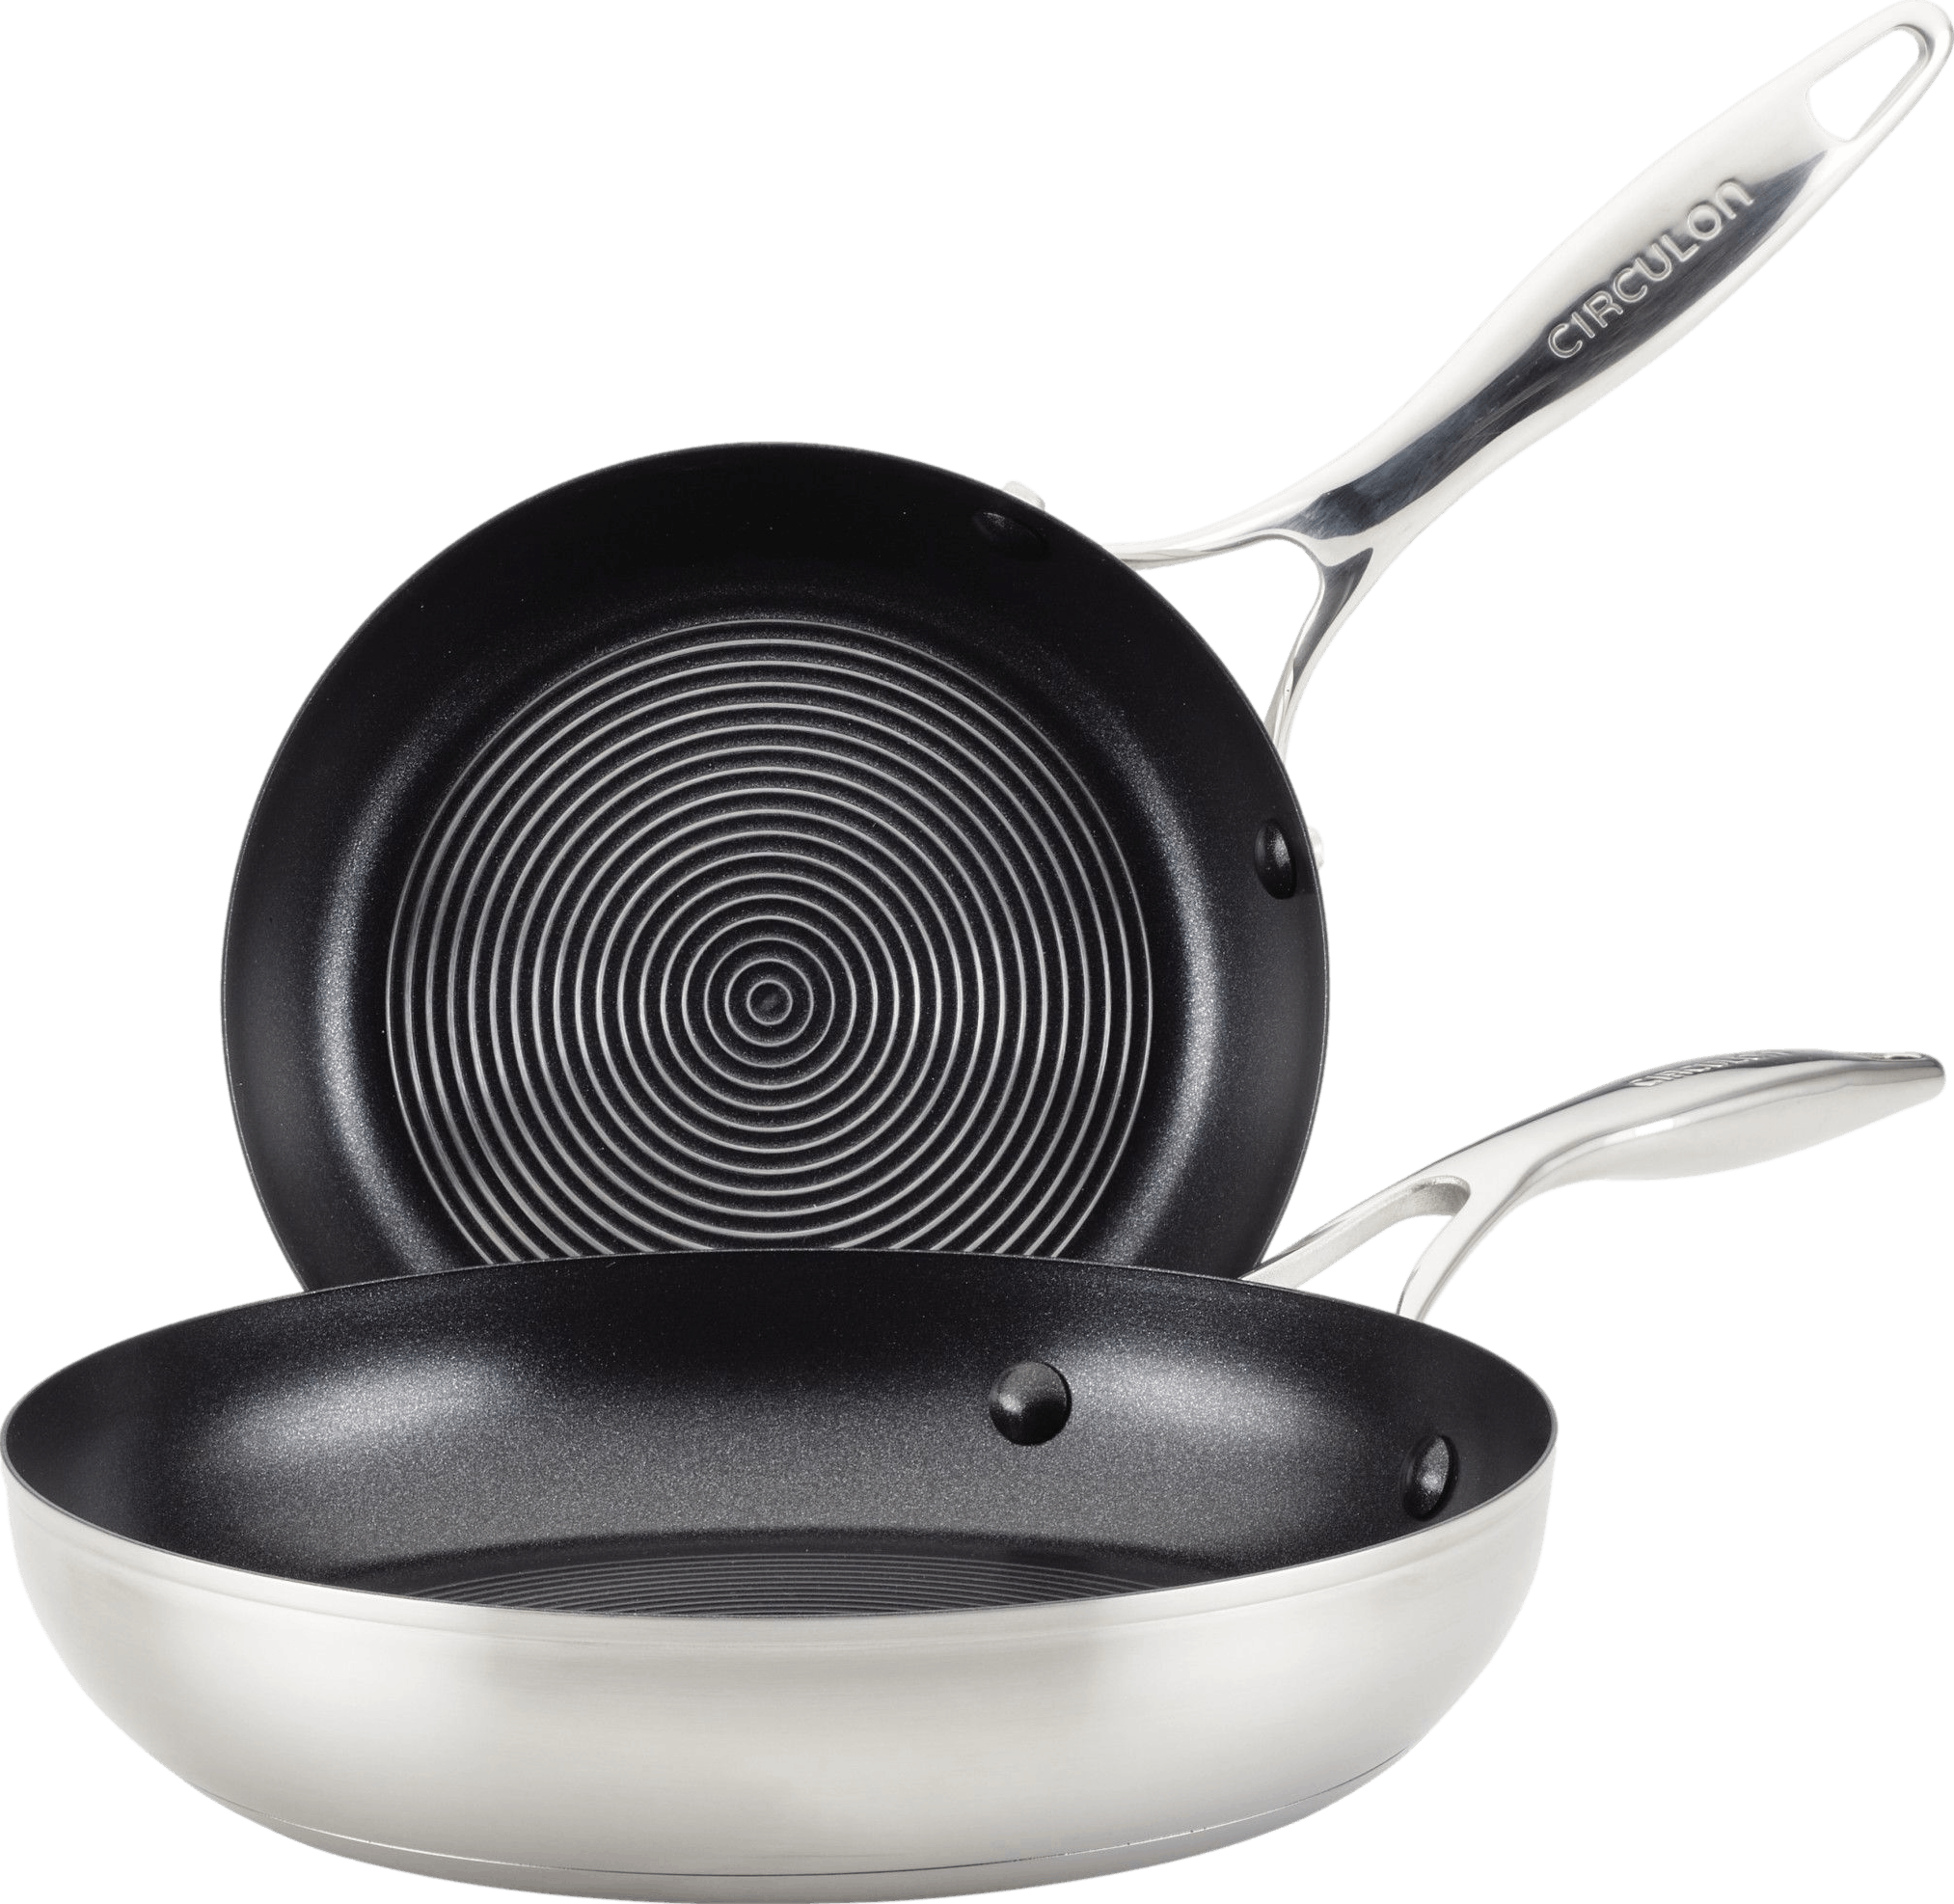 Circulon Stainless Steel Induction Frying Pan Set with SteelShield Hybrid Stainless and Nonstick Technology, 2-piece, Silver